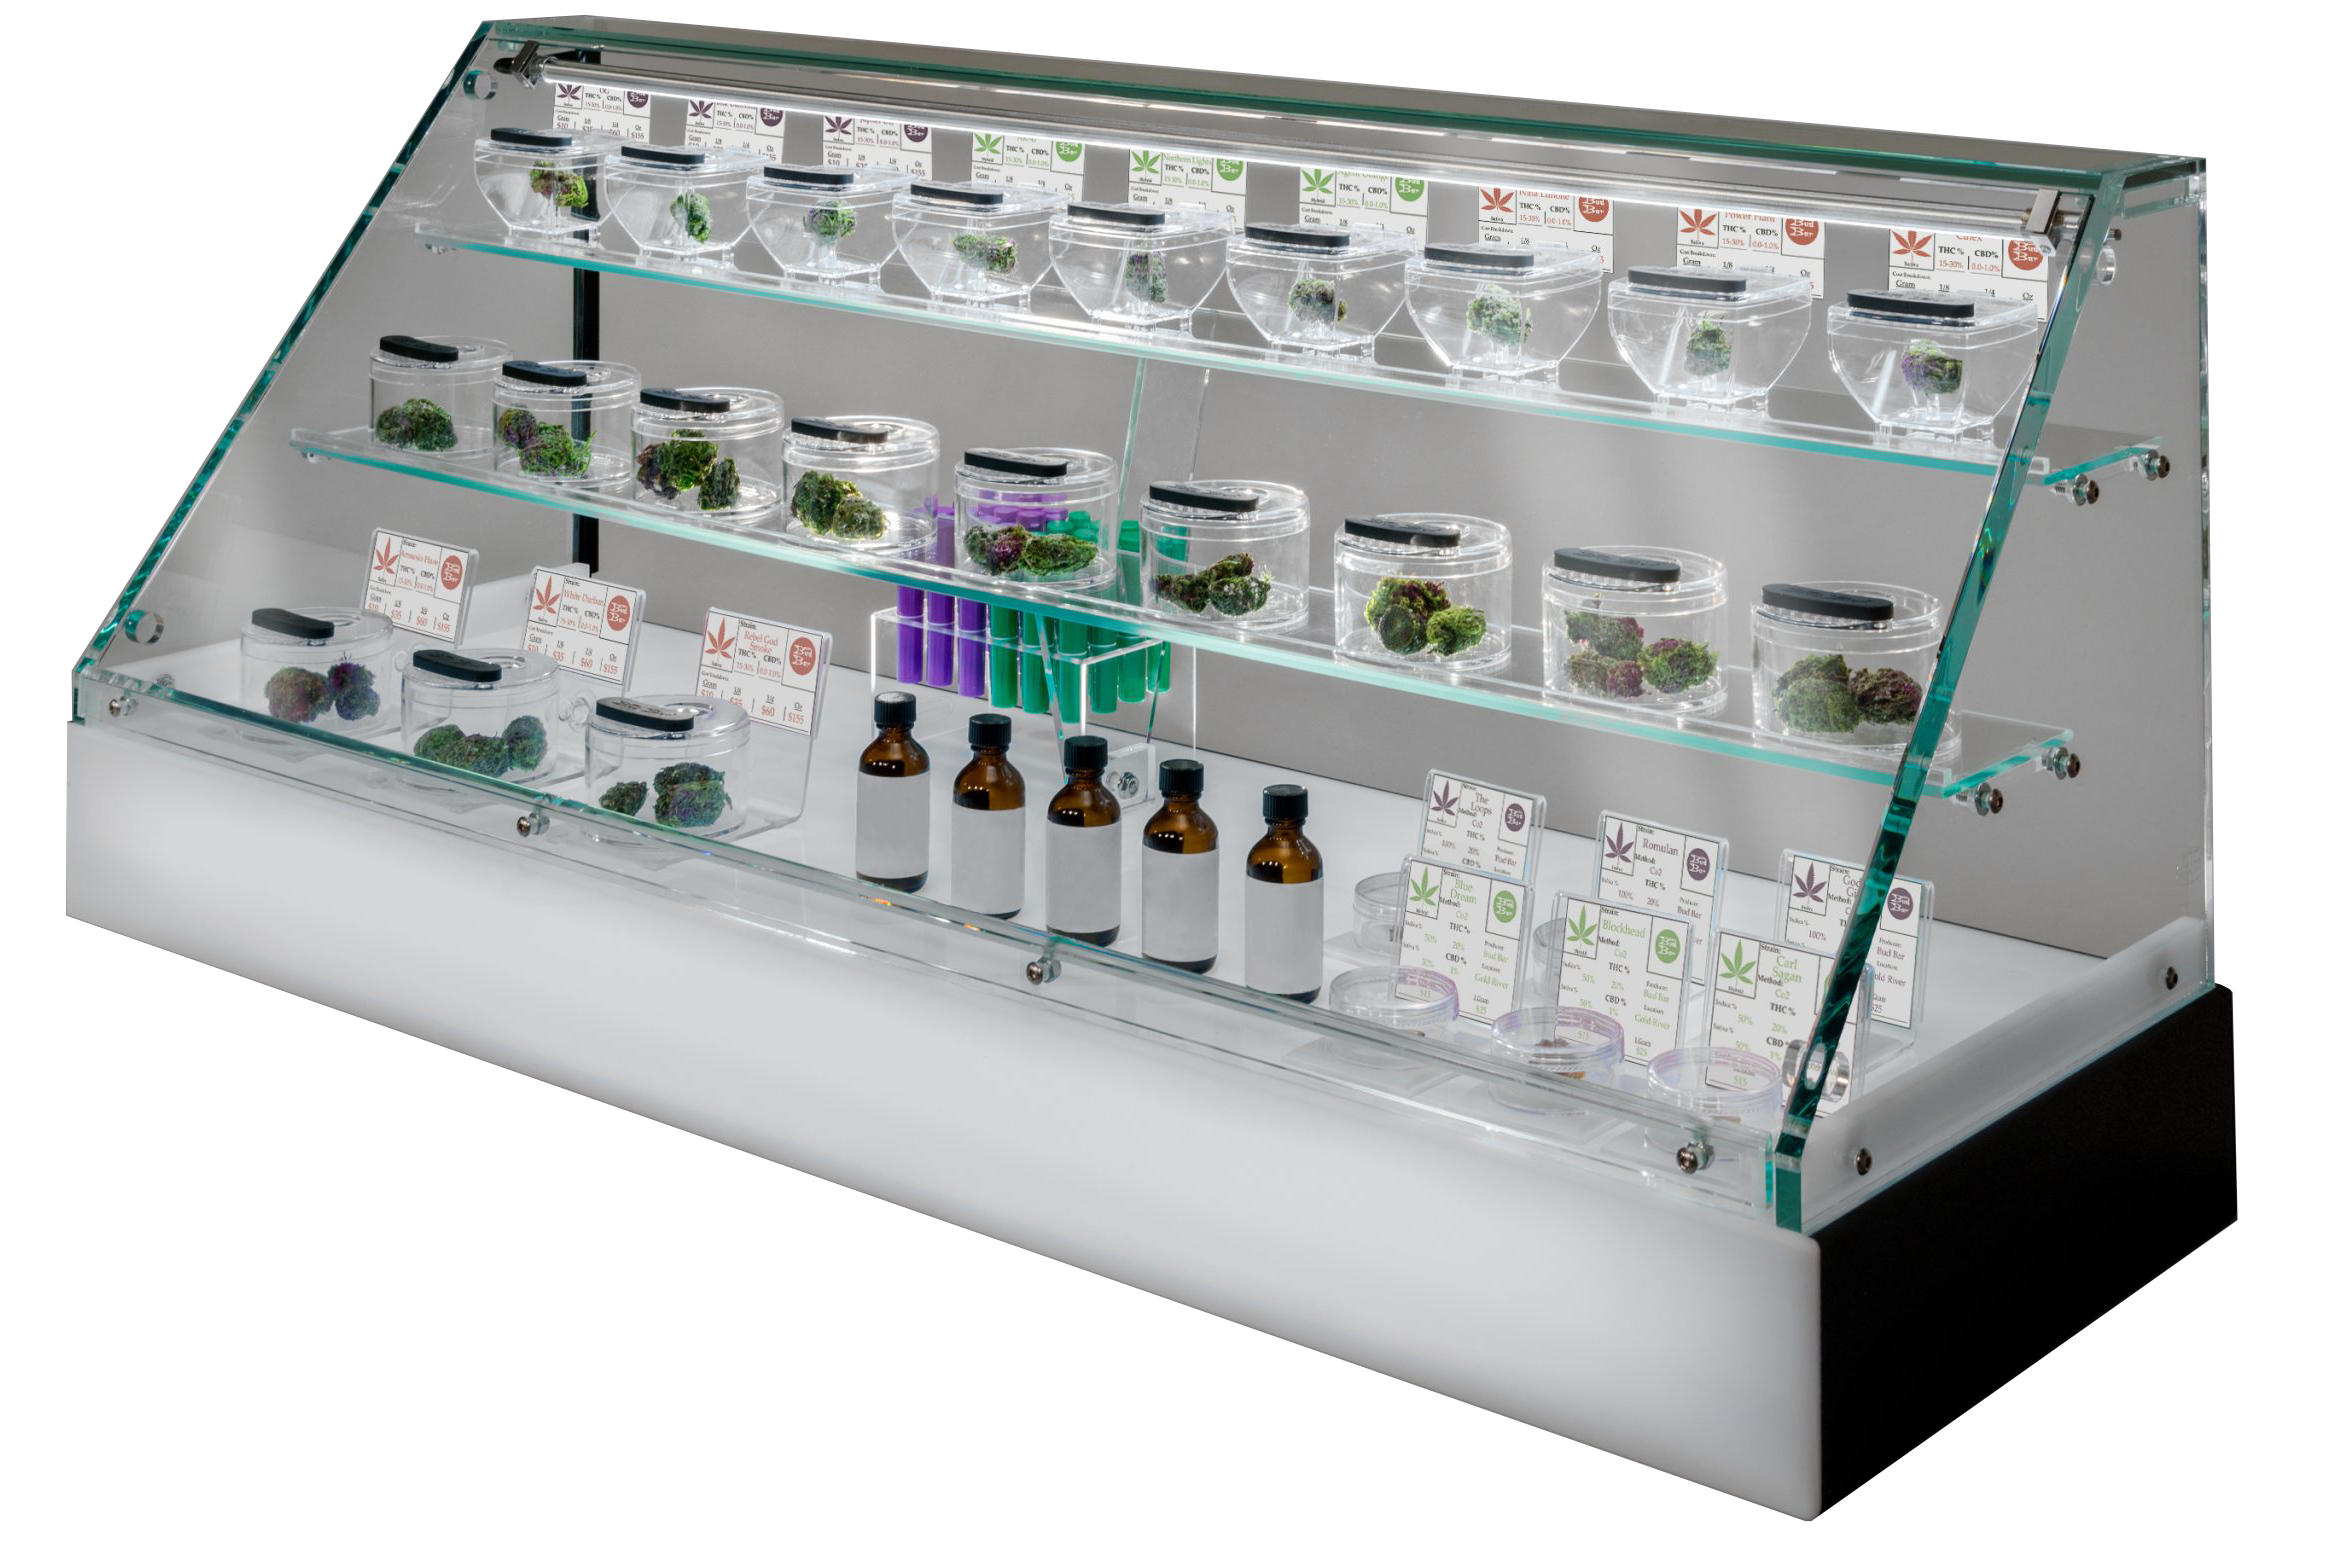 A dispensary display bar with the THC and CBD content of the products being displayed.